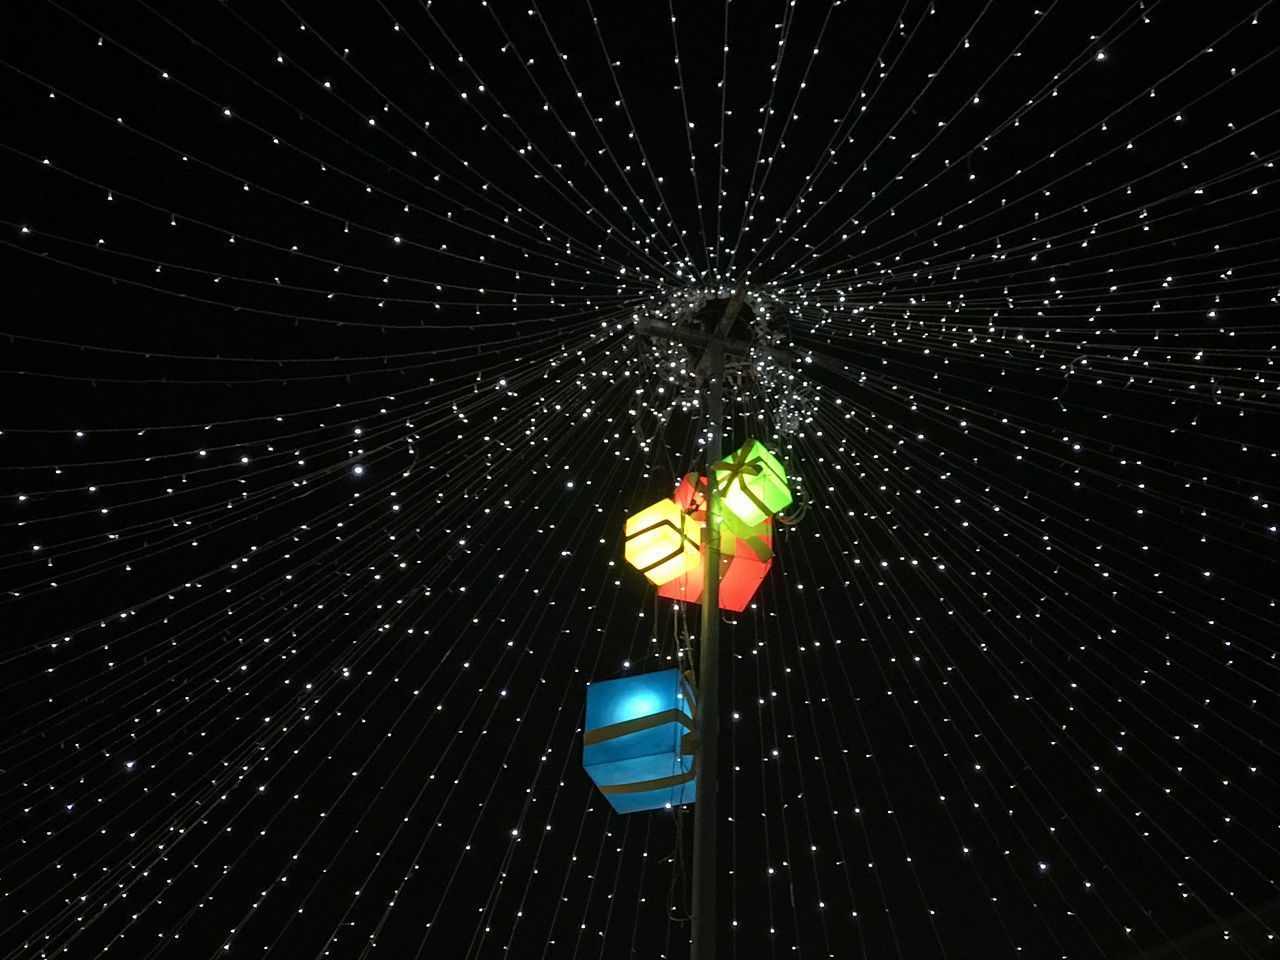 LOW ANGLE VIEW OF ILLUMINATED LIGHTING EQUIPMENT AGAINST STAR SHAPE